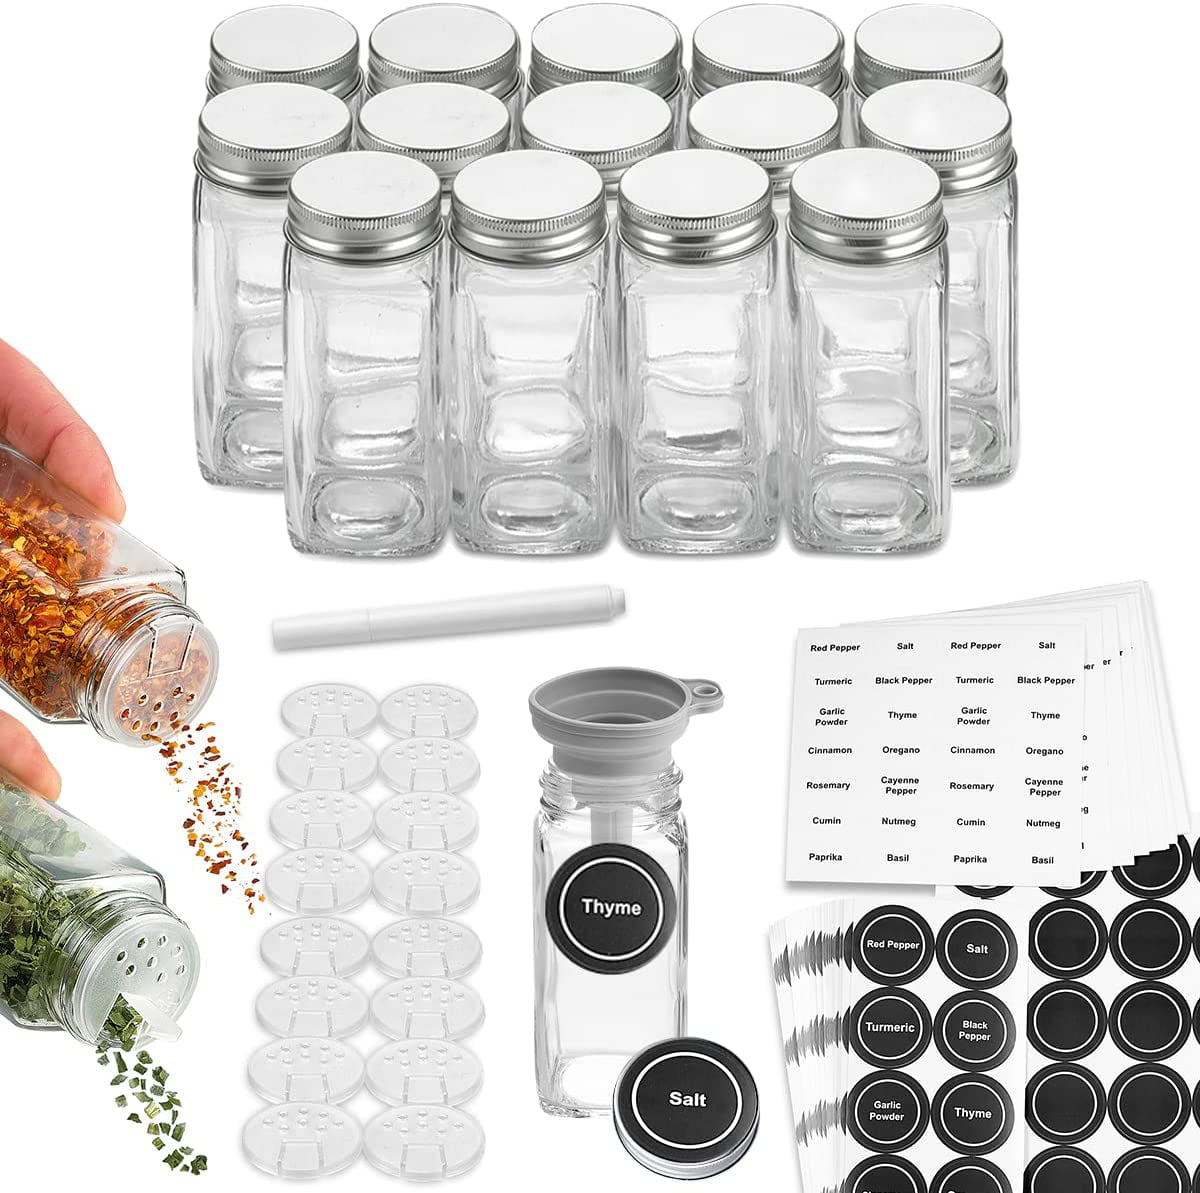 Skyway Supreme 4 OZ Clear Plastic Seasoning Containers Spice Bottles Jars -  Set of 10 - Flap Cap with Sifter Spice Shaker - Durable Refillable - BPA